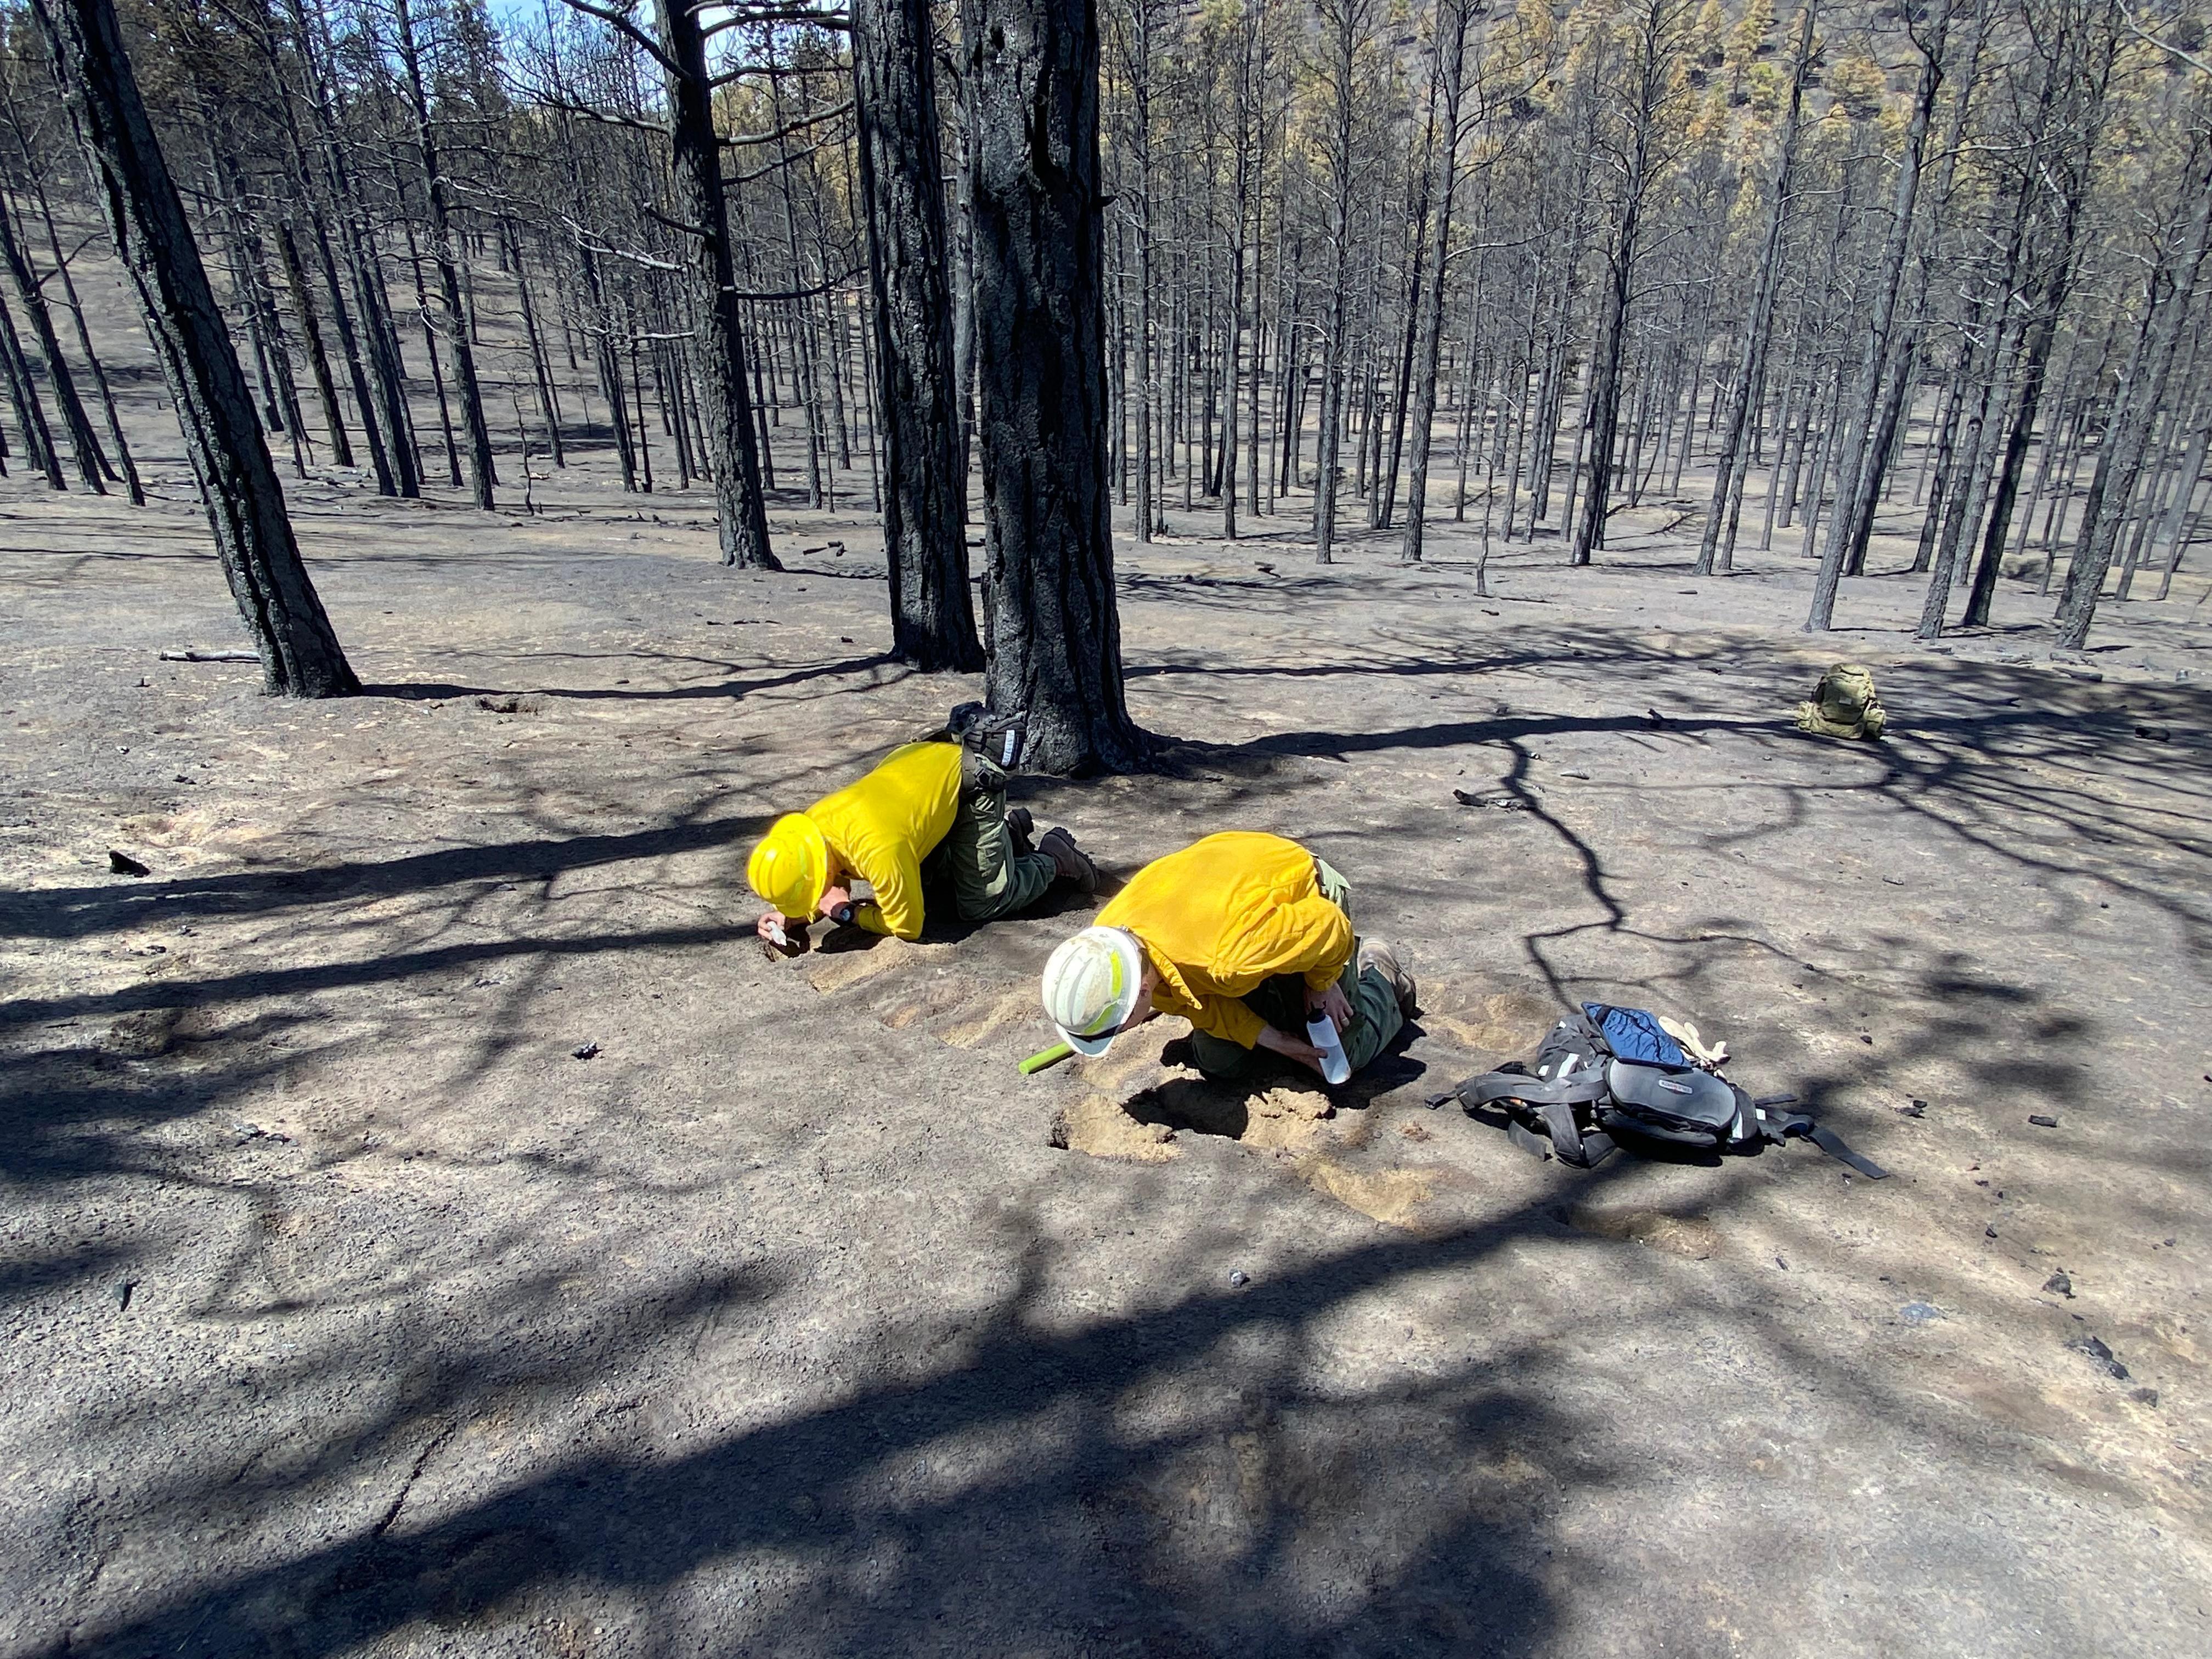 Hydrologist Dan Bone (left) and Soil Scientist Rob Ballard (right) conducting burn severity assessment on the Tunnel Fire west of Sunset Crater National Monument